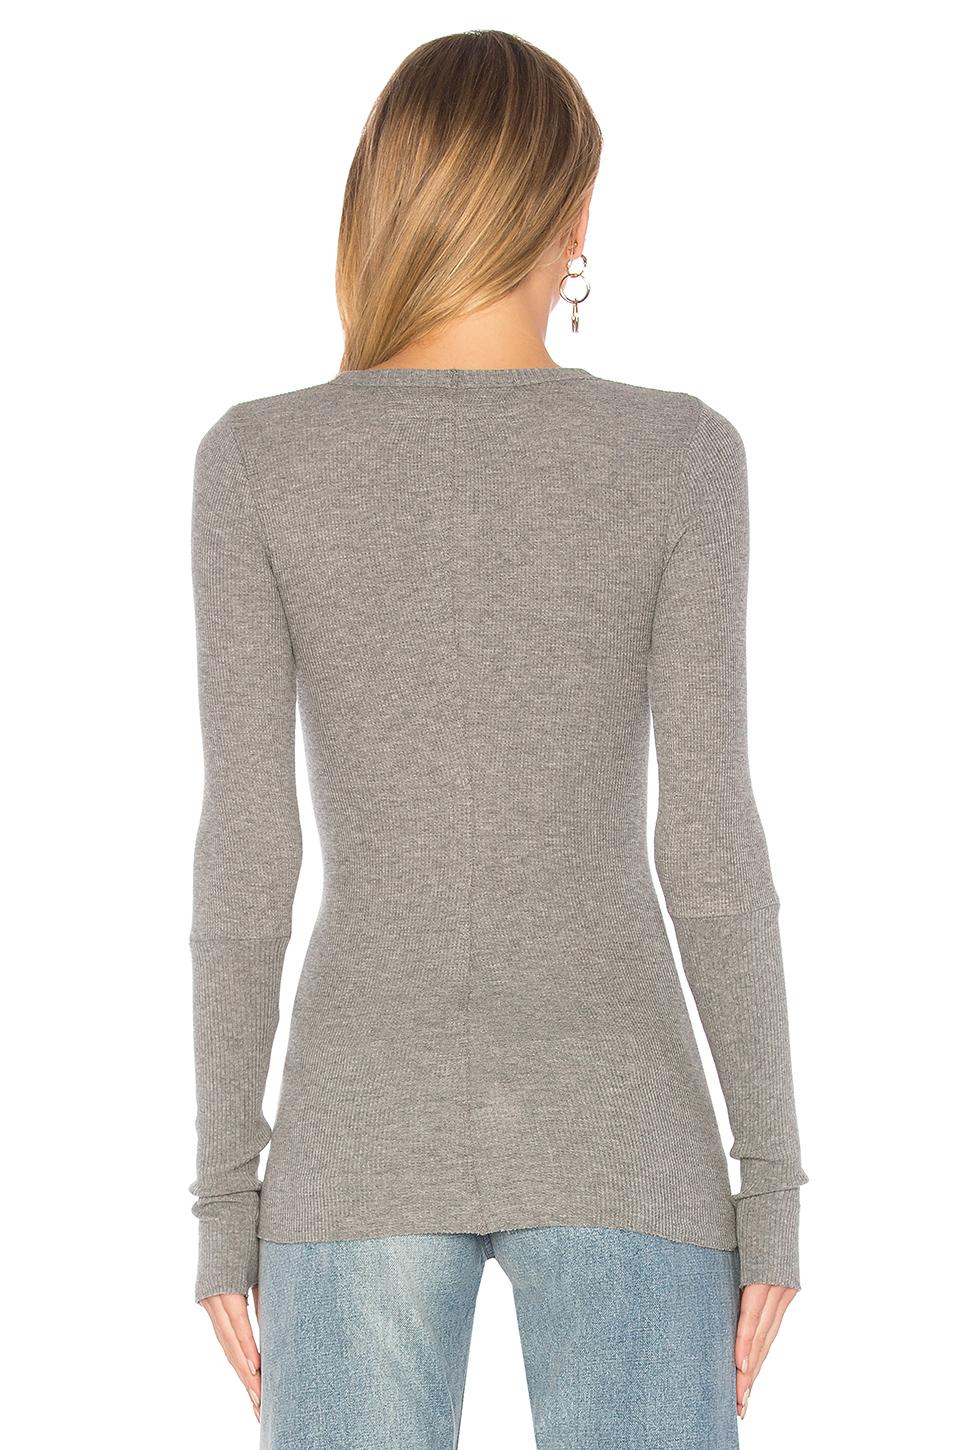 Enza Costa Cashmere Thermal Long Sleeve Top in Smoke (Gray) - Lyst